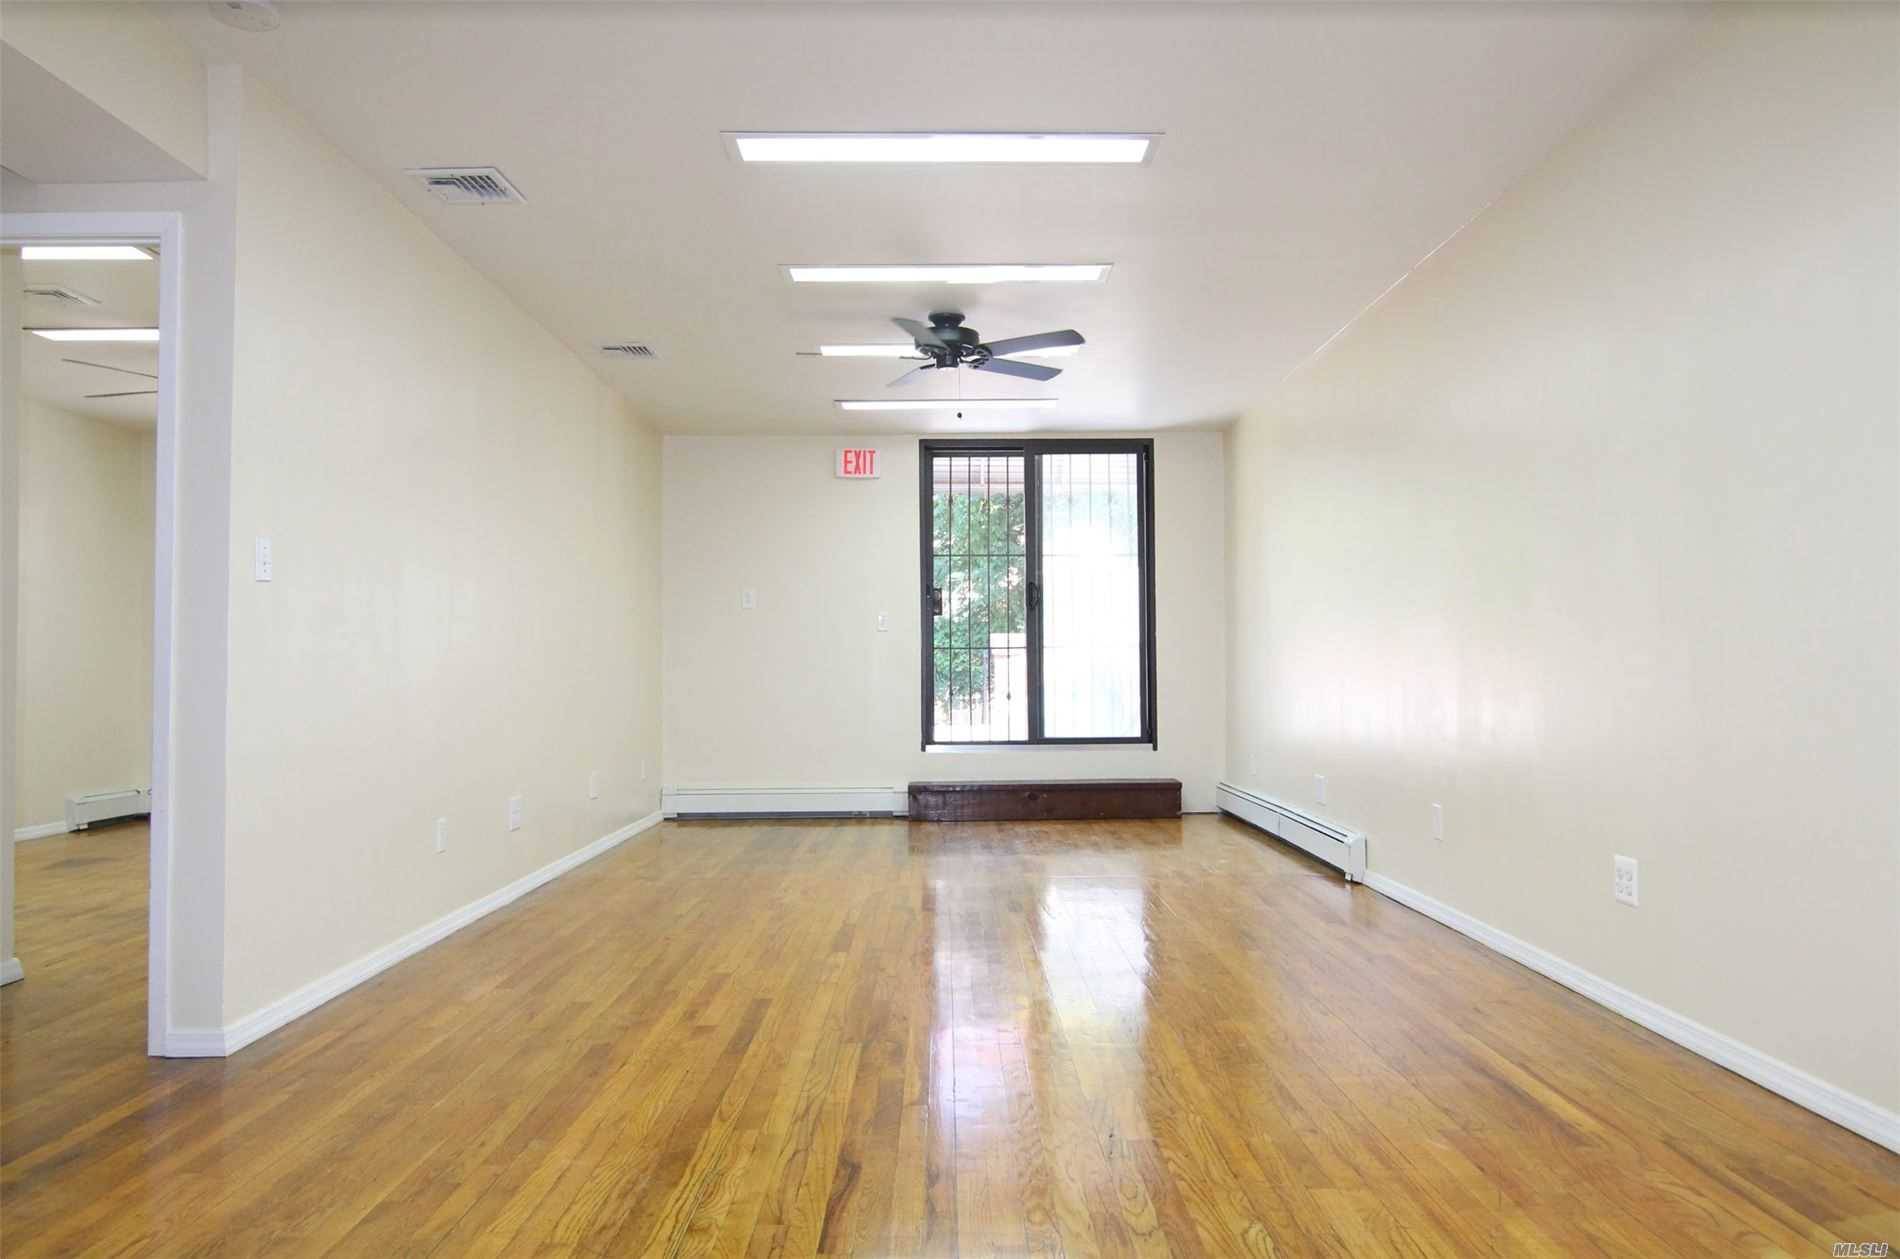 2nd Floor Commercial Retail, Separate Kitchen Area, Separate office space with private area, Hardwood Floors, Gas Line, Newly renovated, Close to 7 Train 103rd Shea Stadium, and Grand Central Parkway, ...